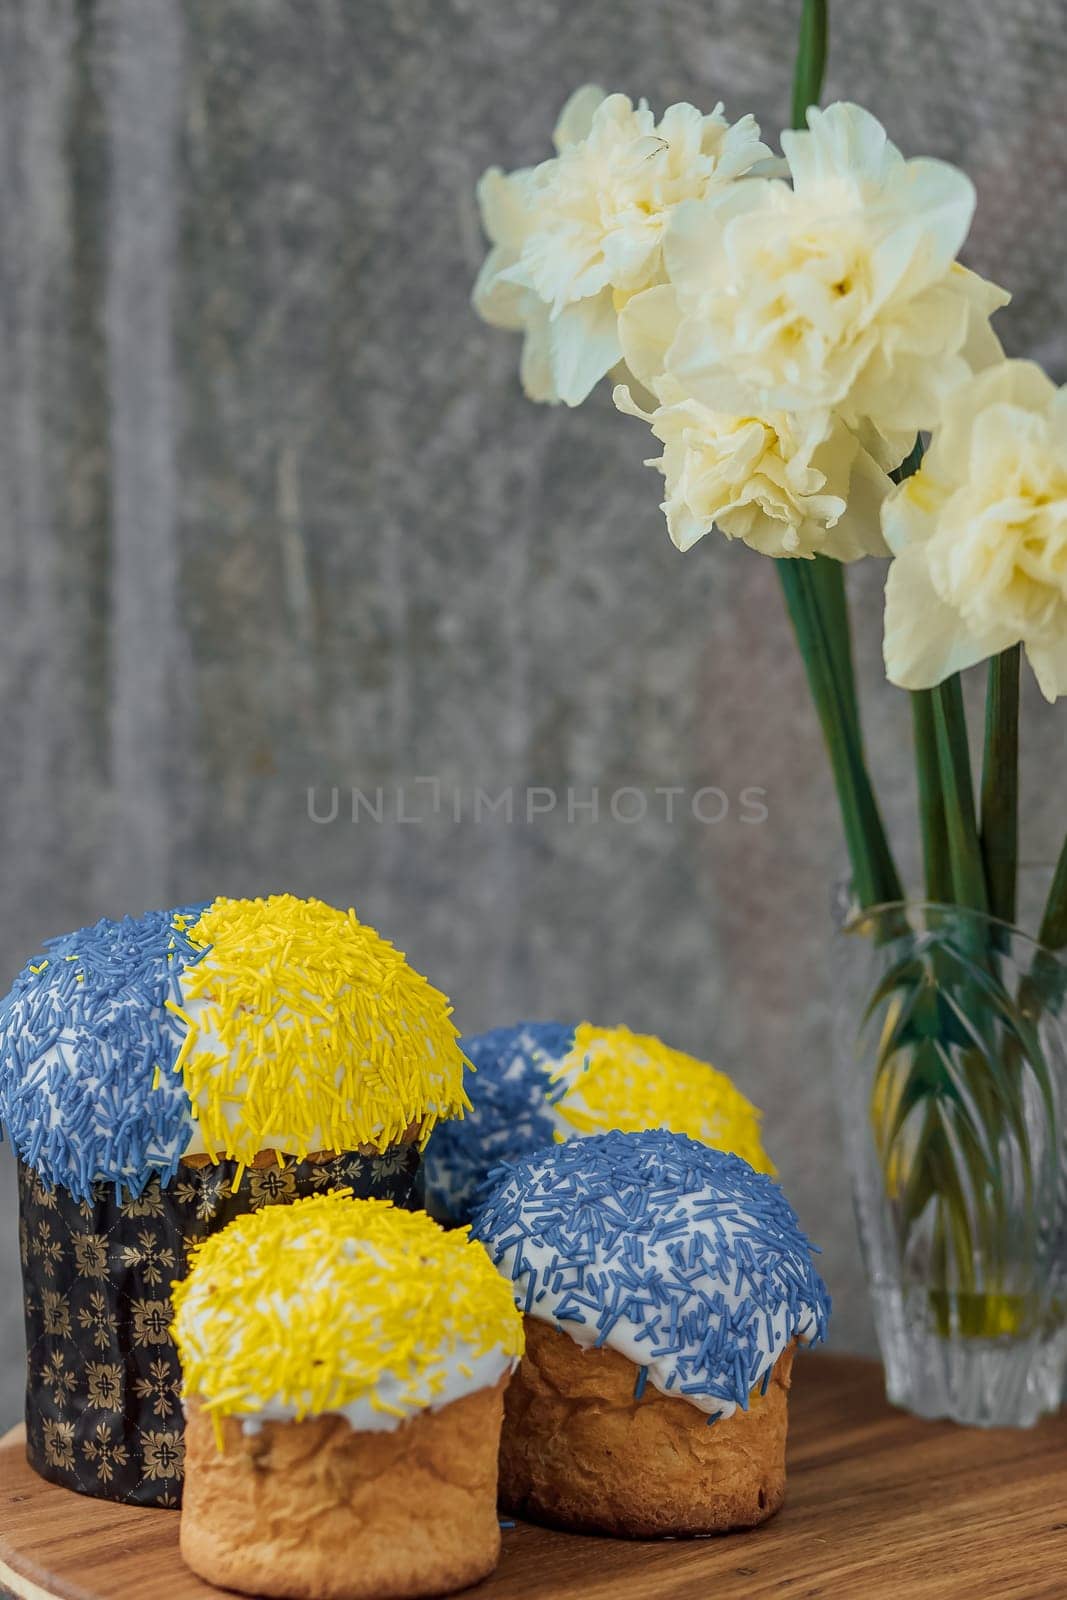 Delicious Easter cakes in the colors of the flag of Ukraine, yellow and blue on a wooden table with flowers in the background. place for text. selective focus by Anyatachka